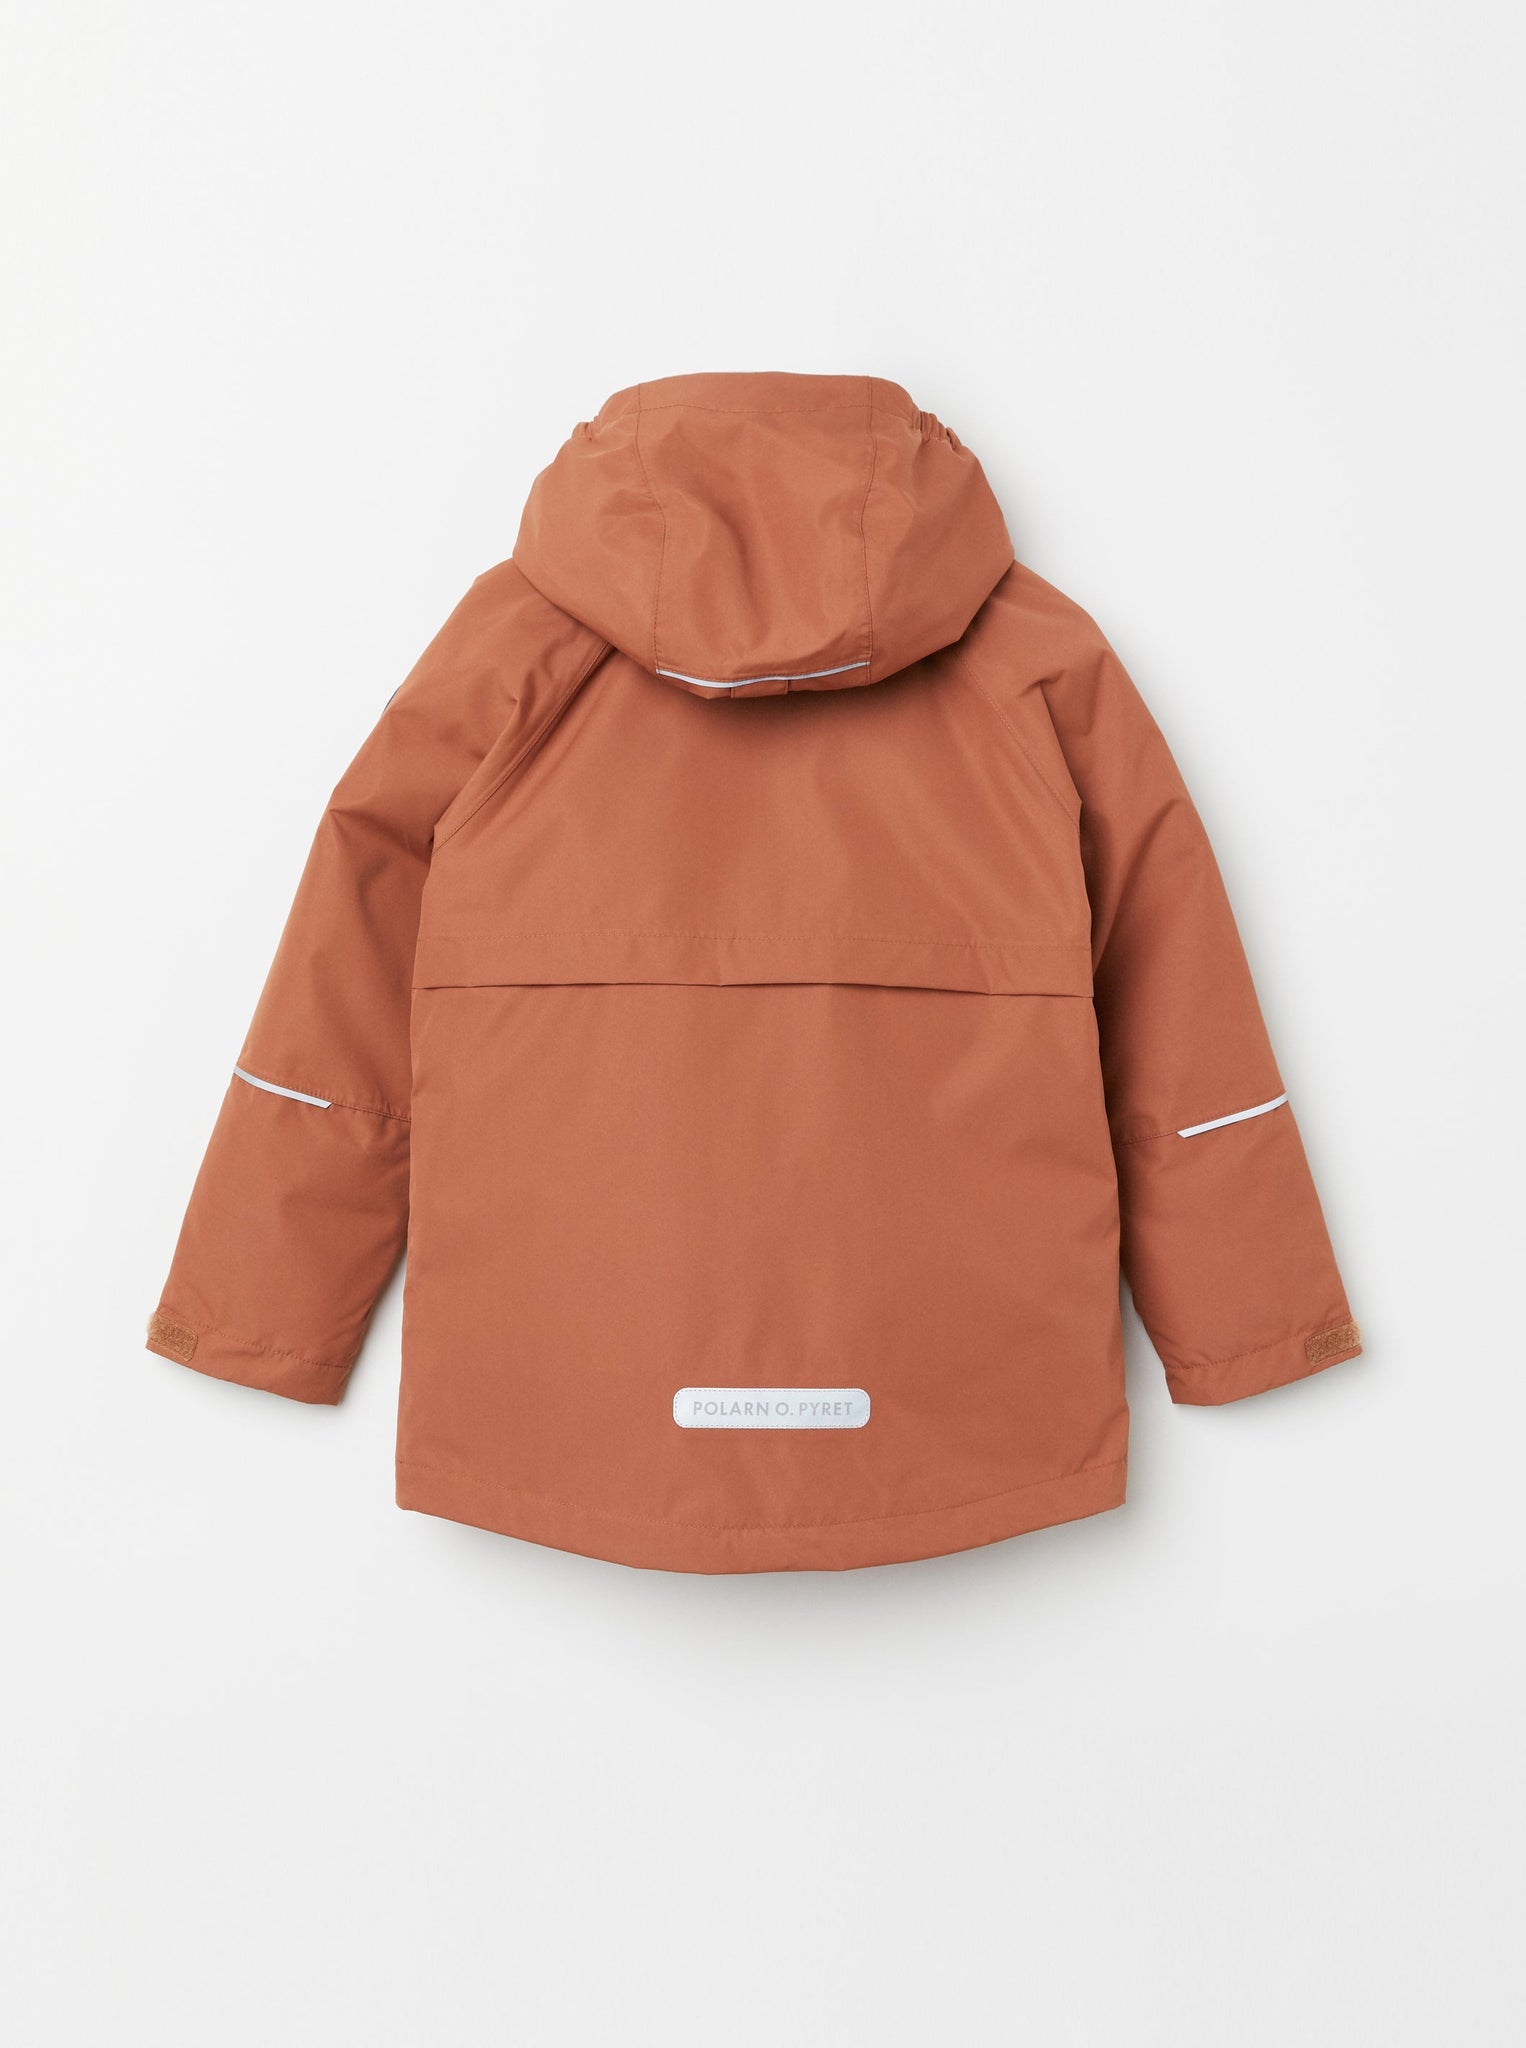 Orange 3-In-1 Kids Coat from the Polarn O. Pyret kidswear collection. Made from sustainable sources.